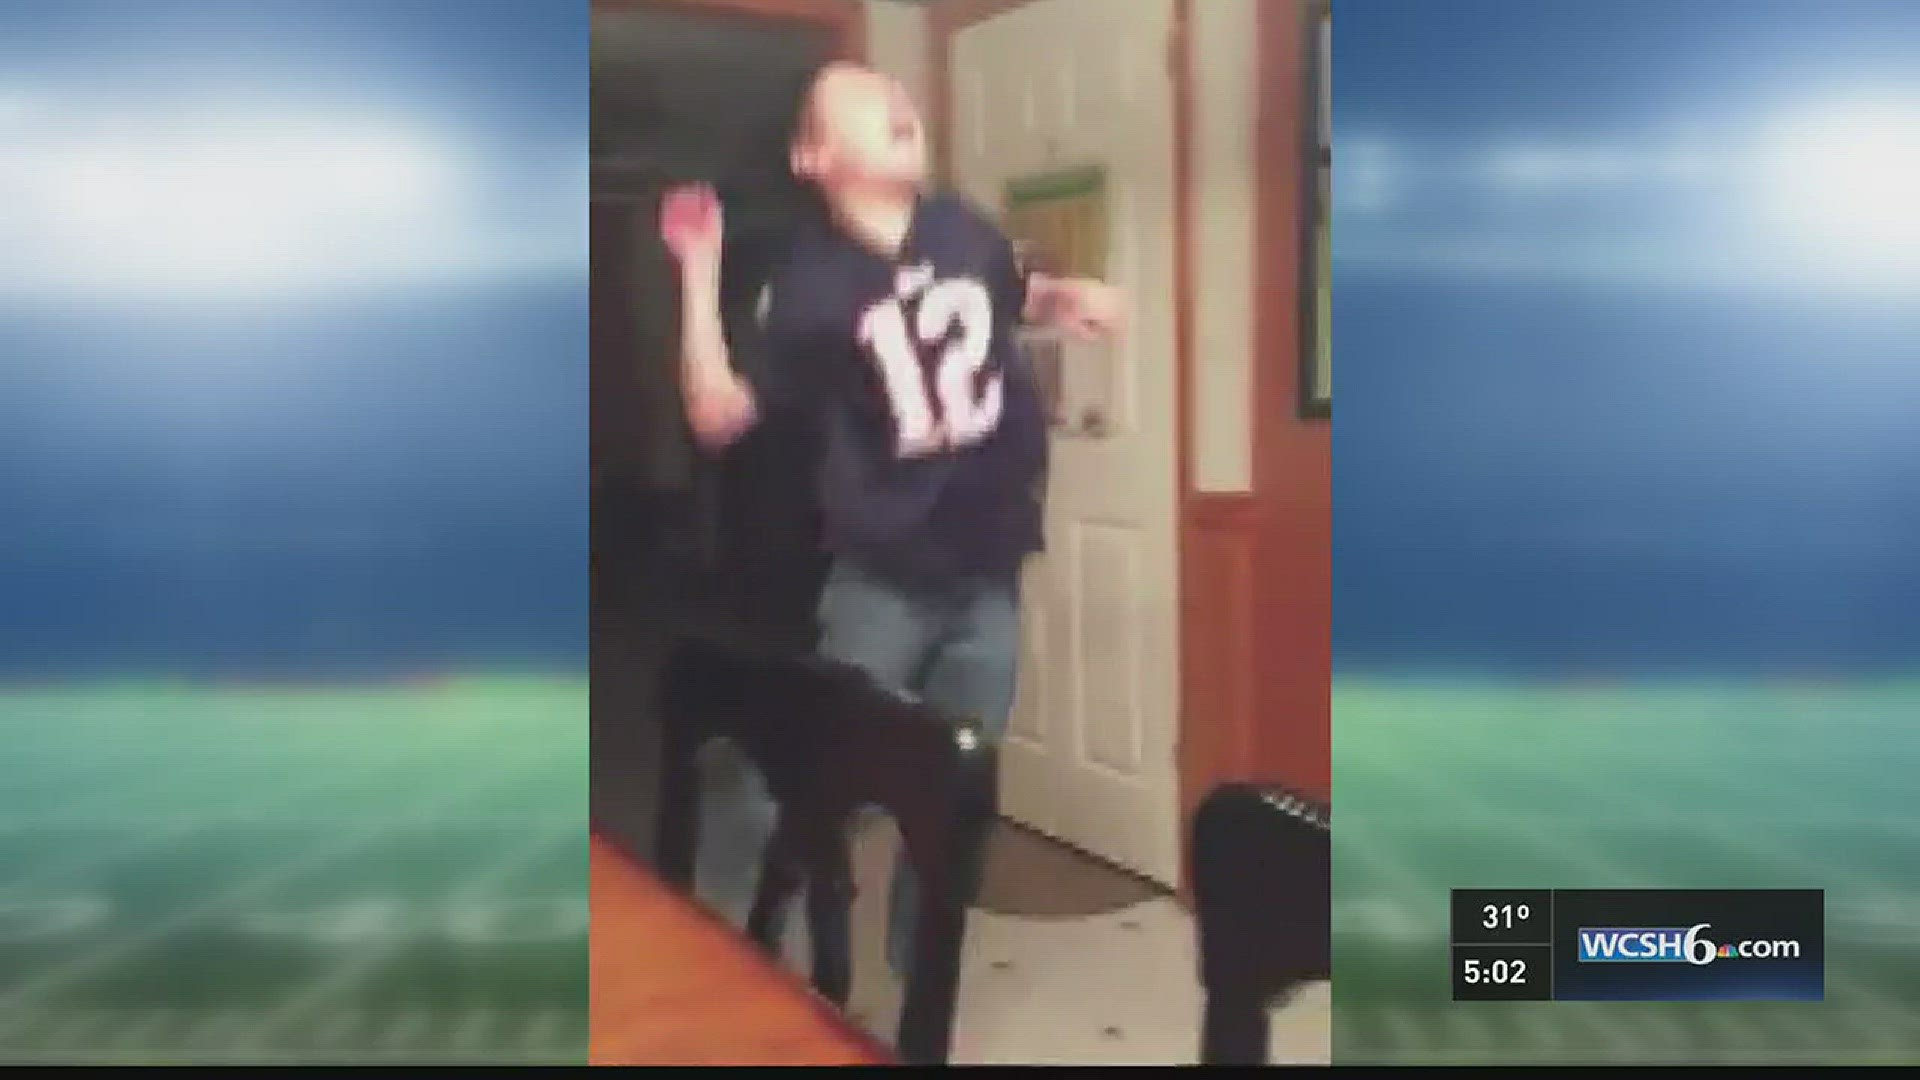 Mainers celebrate after Pats win Super Bowl